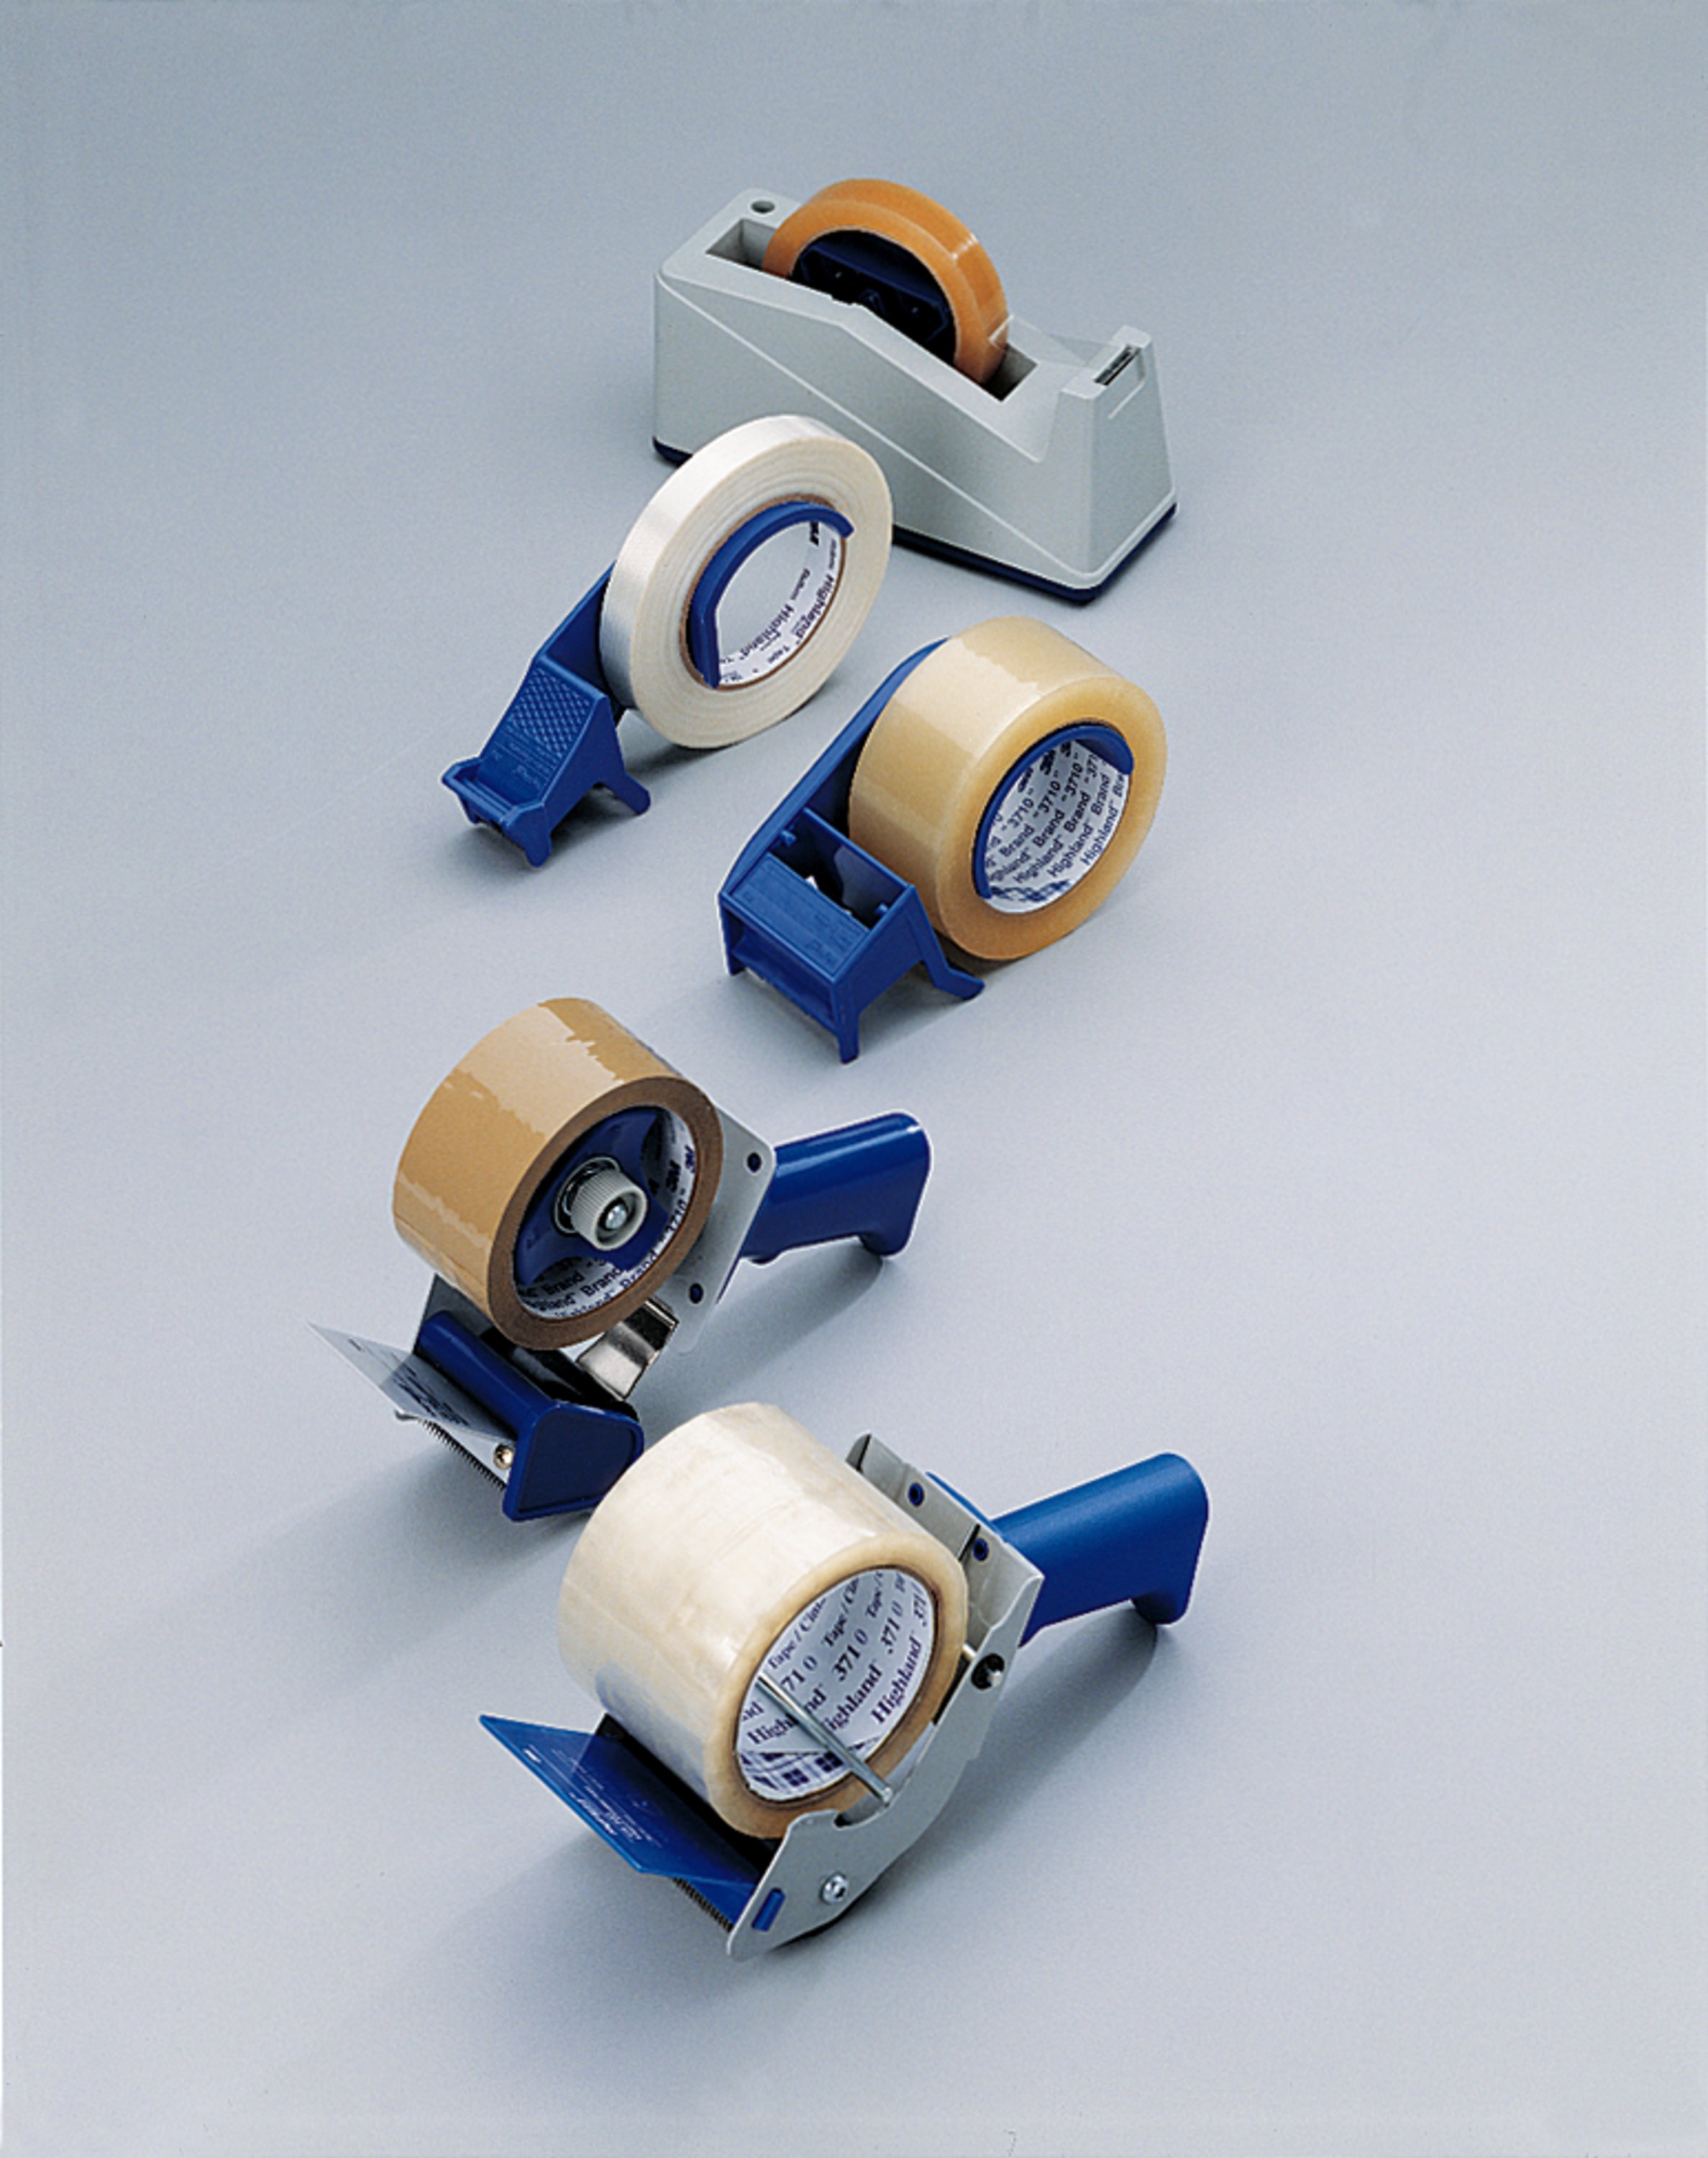 The Tartan™ Tabletop Tape Dispenser HB900 easily handles film tapes up to 1 inch wide x 72 yards on a 3 inch core.